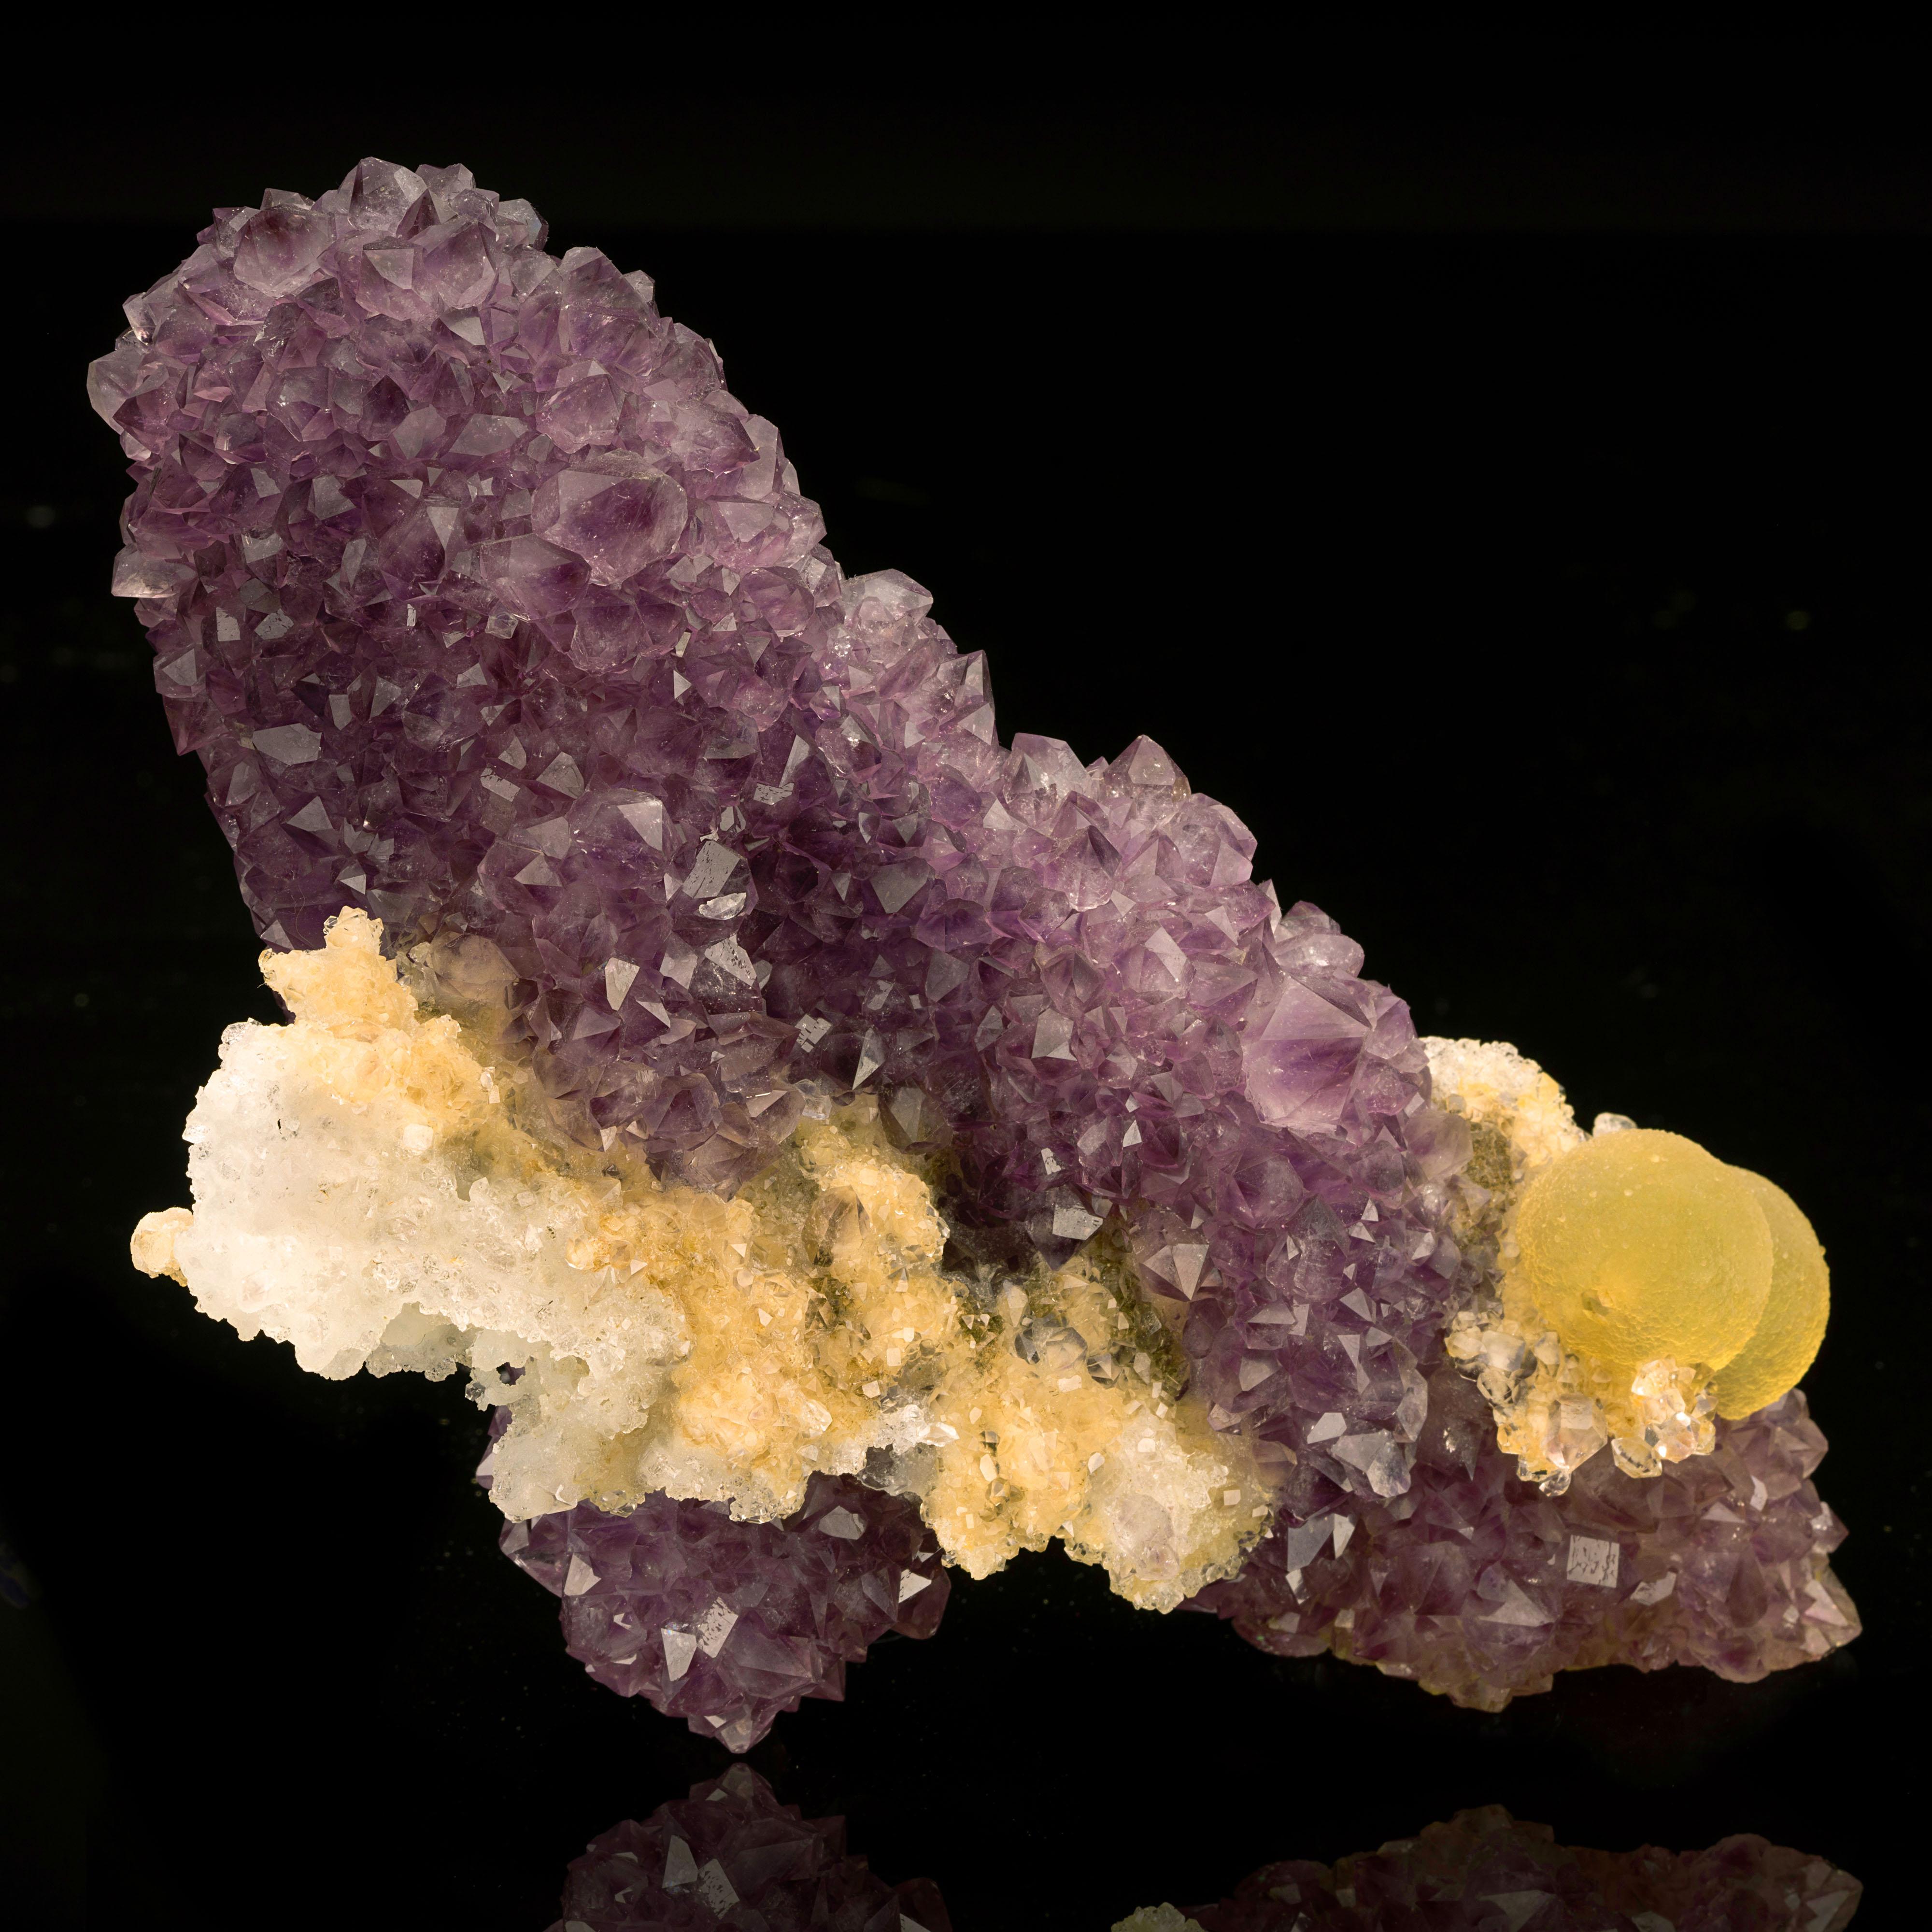 Indian Amethyst Stalactite with Botryoidal Fluorite and Calcite (The High Heel) For Sale